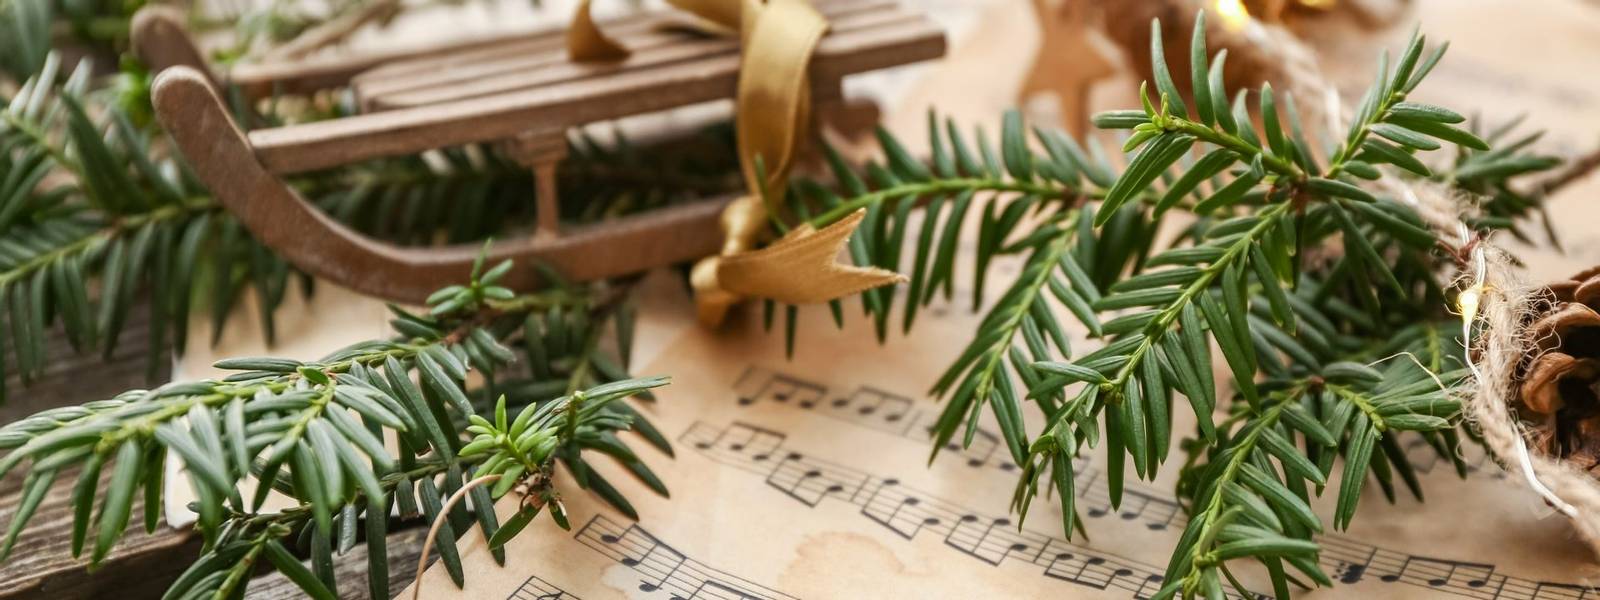 Christmas composition with music notes on wooden table